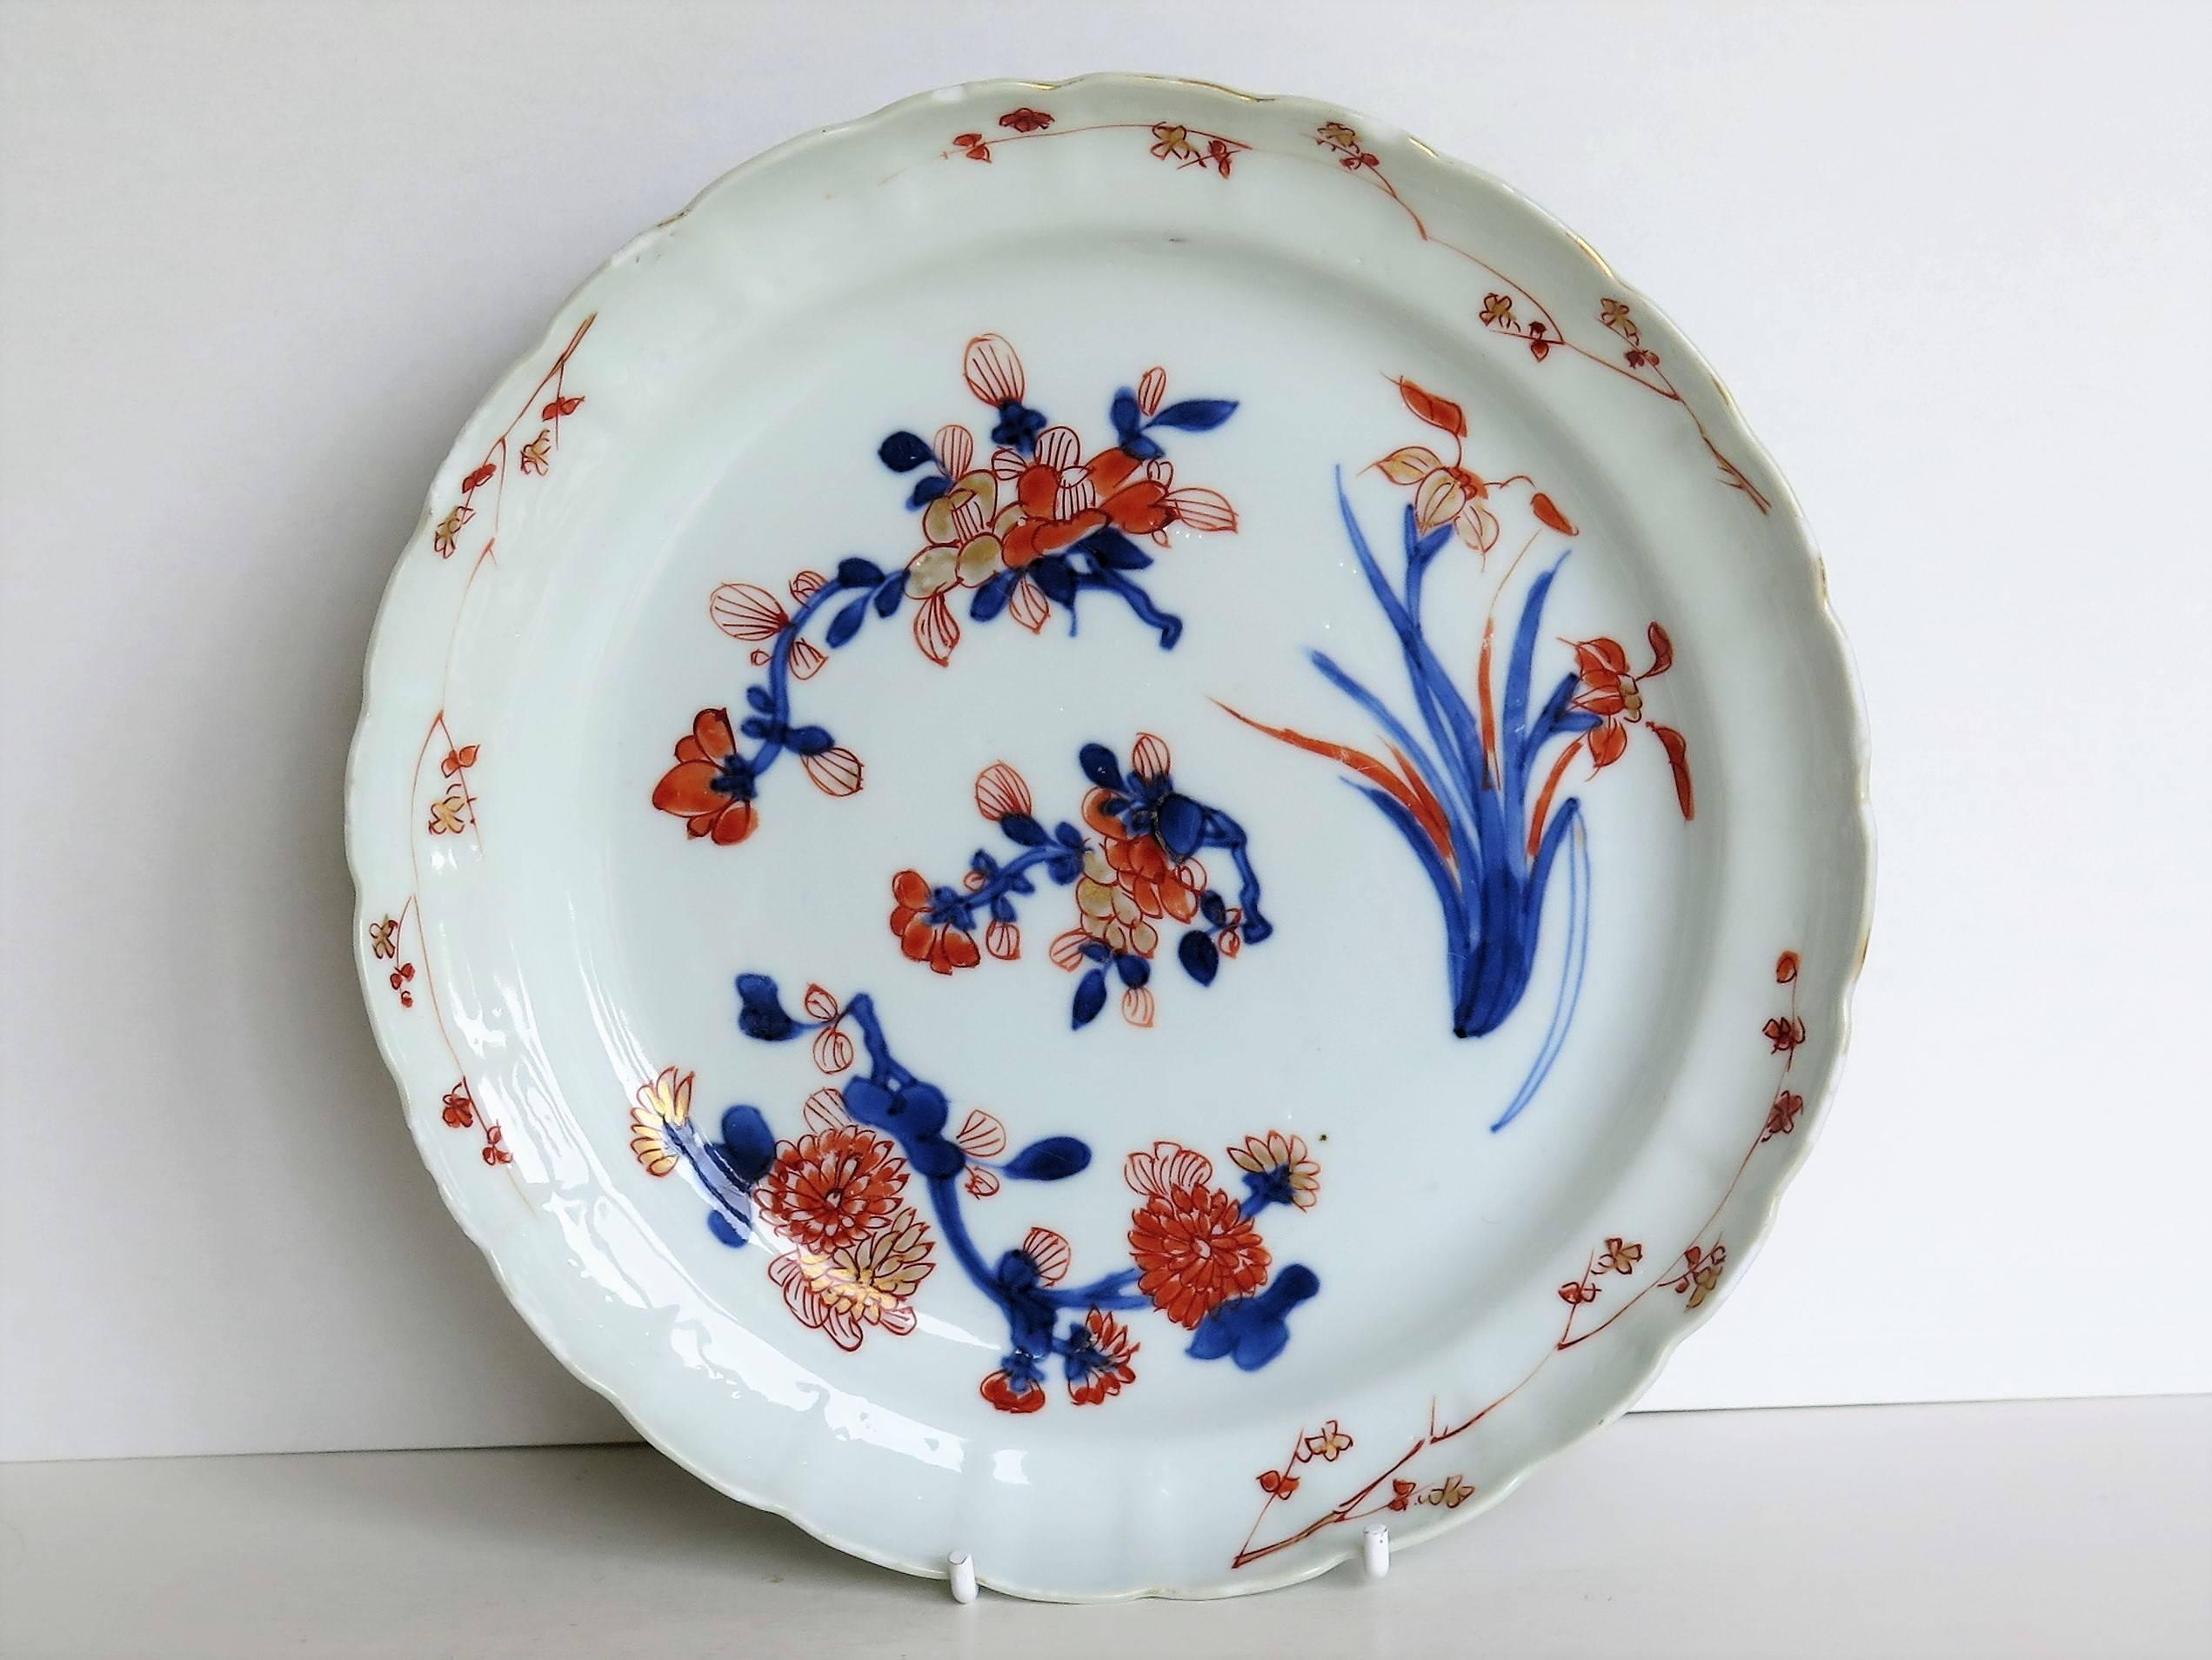 This is a fine Chinese porcelain plate or dish from the early 18th century, which we attribute as a piece made in the Imari style for the export market probably to Japan.

The dish is finely potted with a contoured and partially lobed edge around